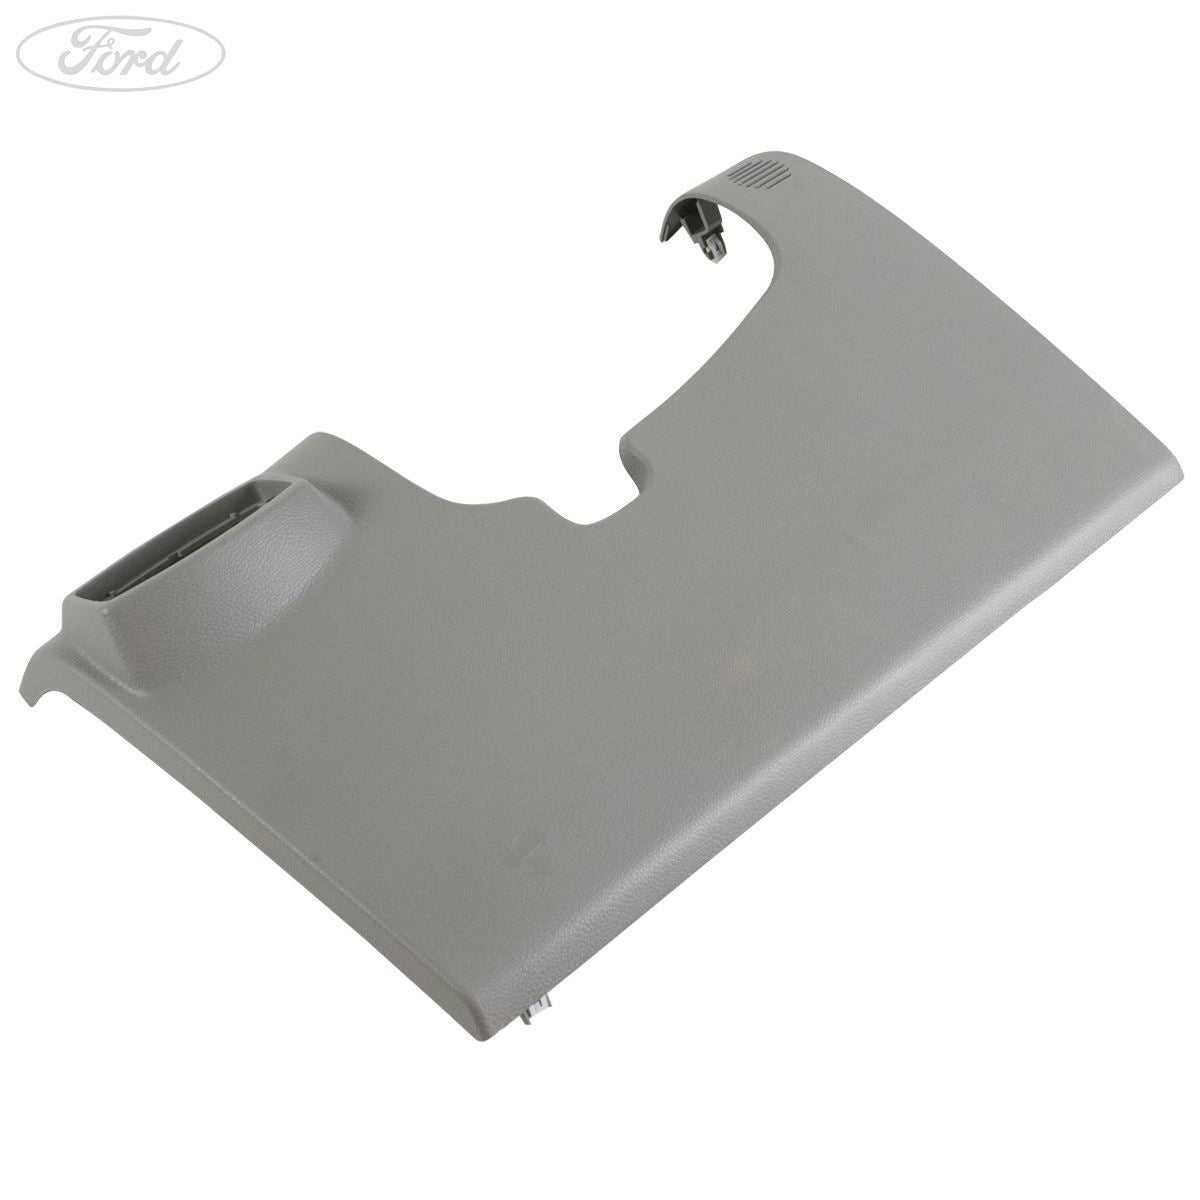 Ford, STEERING COLUMN OPENING COVER